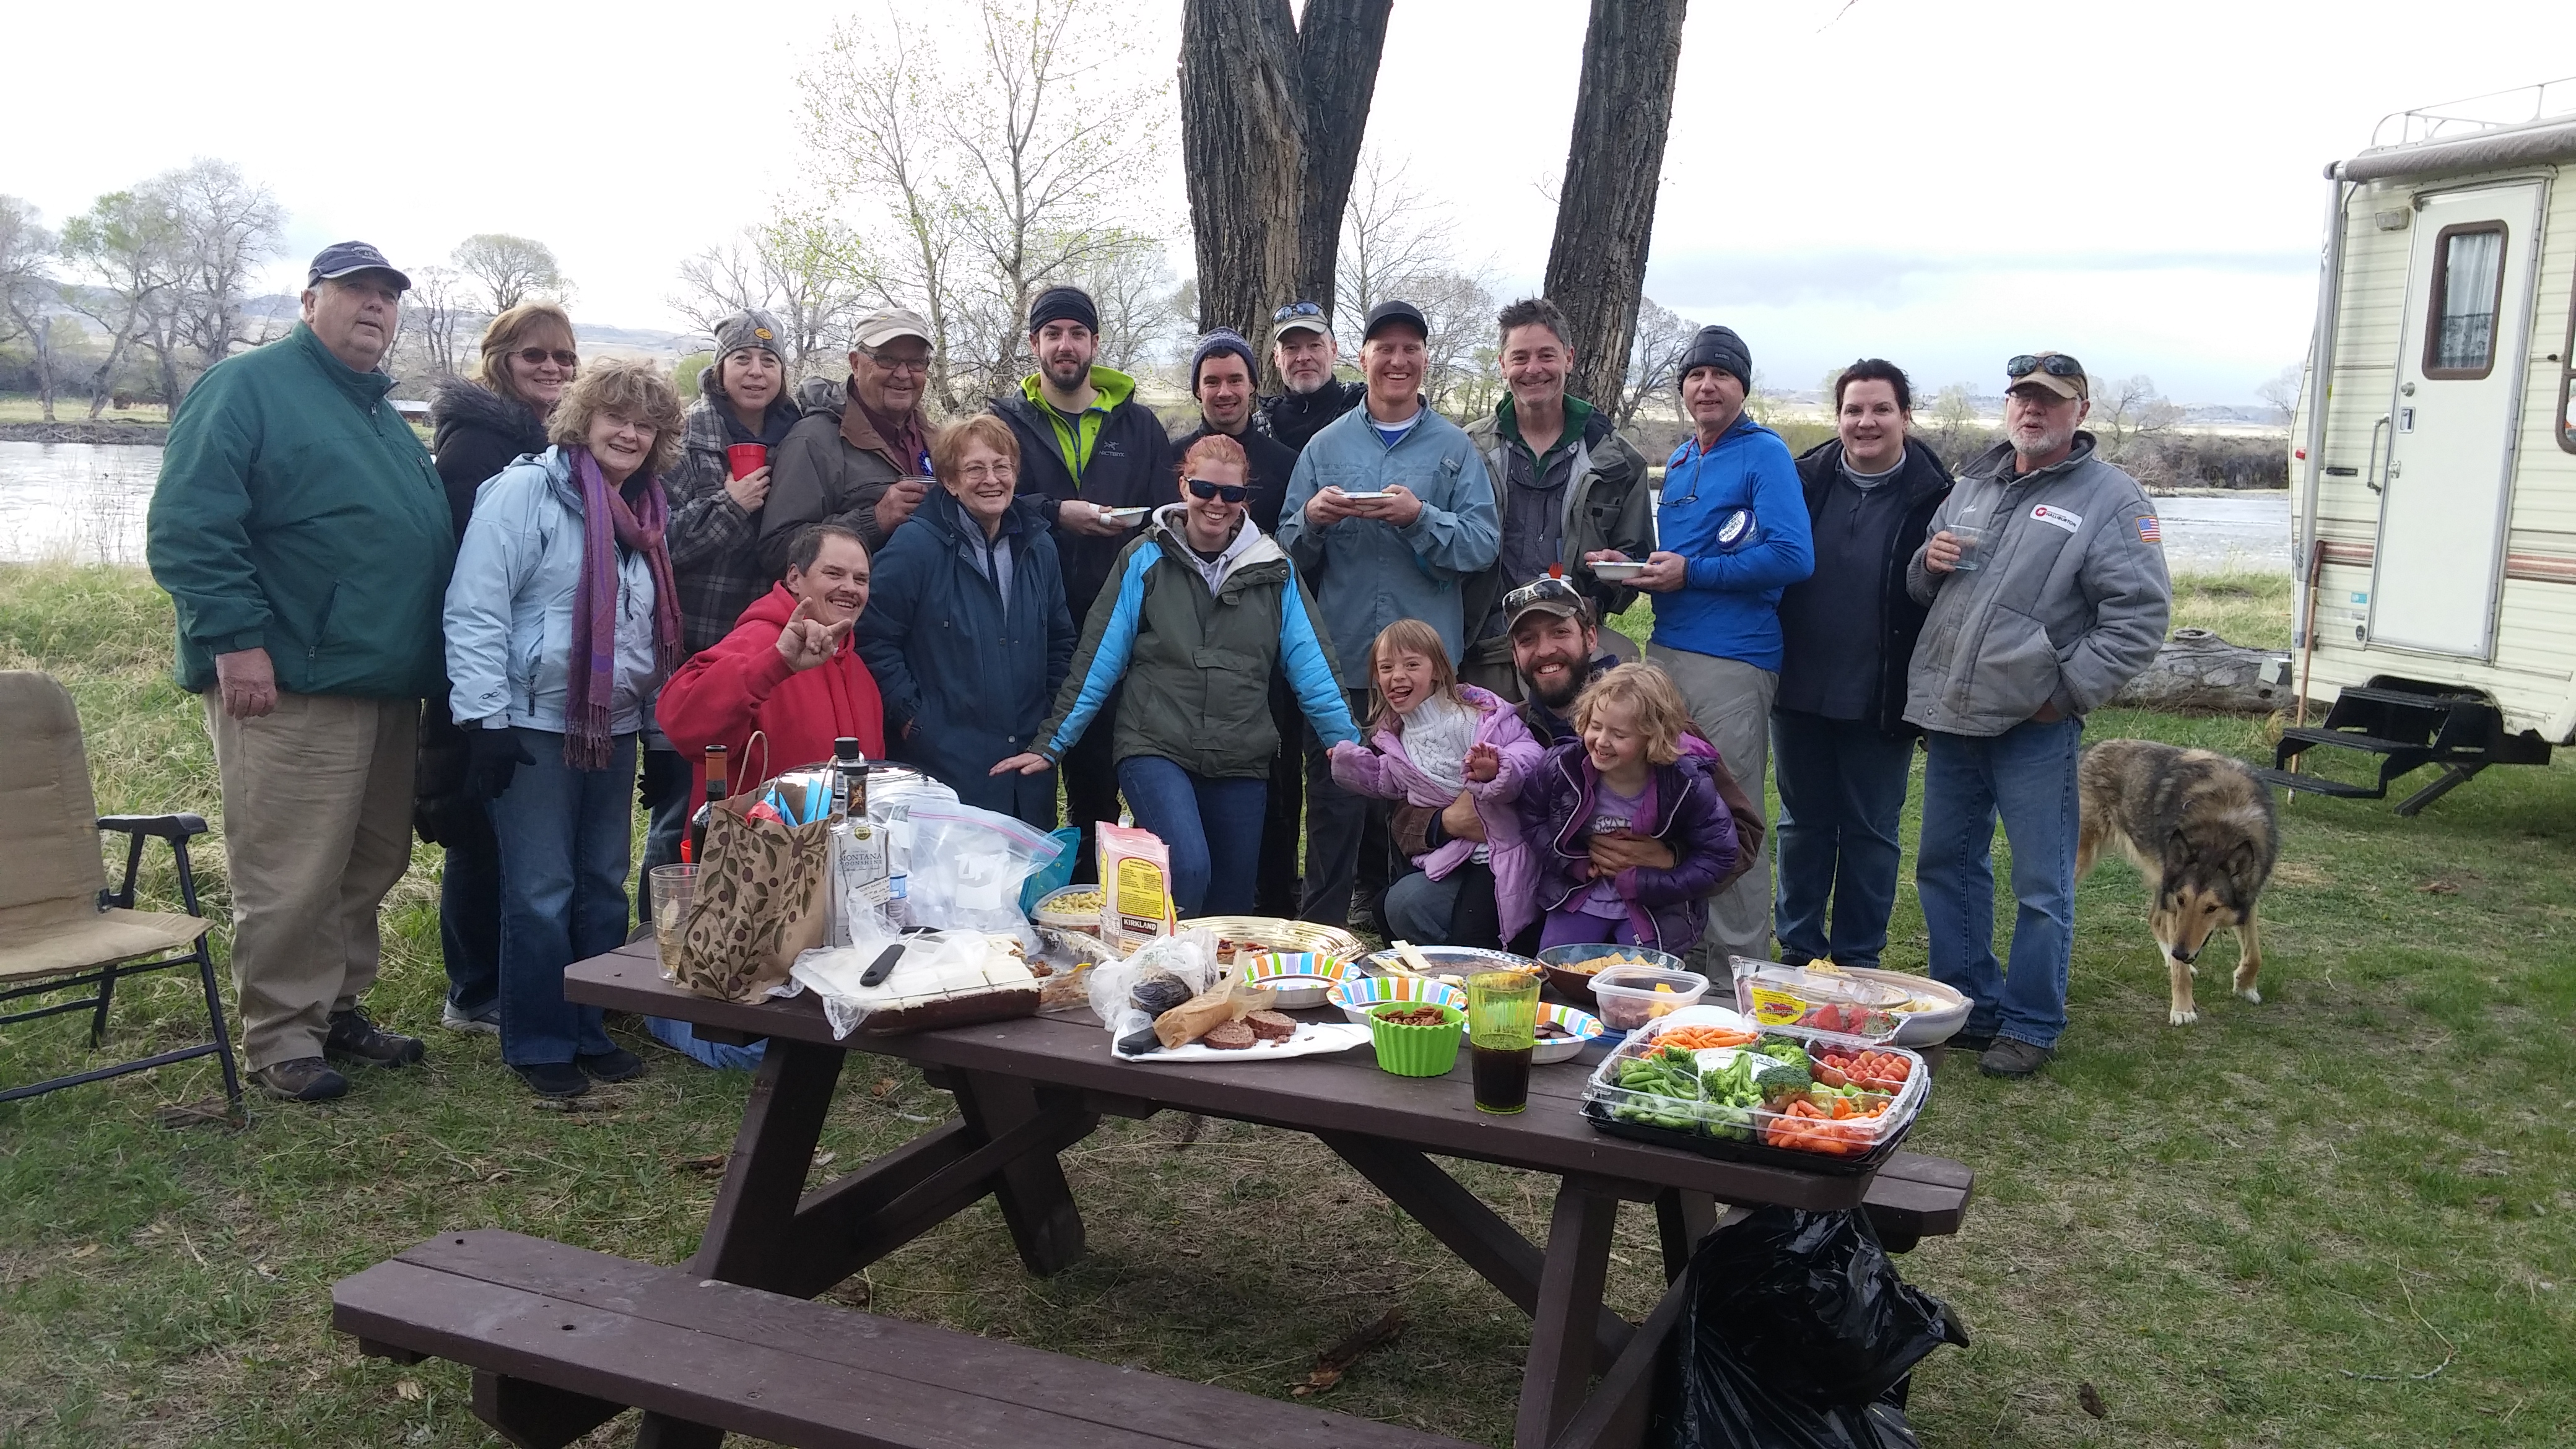 The Montana Unit joined by friends and members of Backpacking Light from Bozeman.